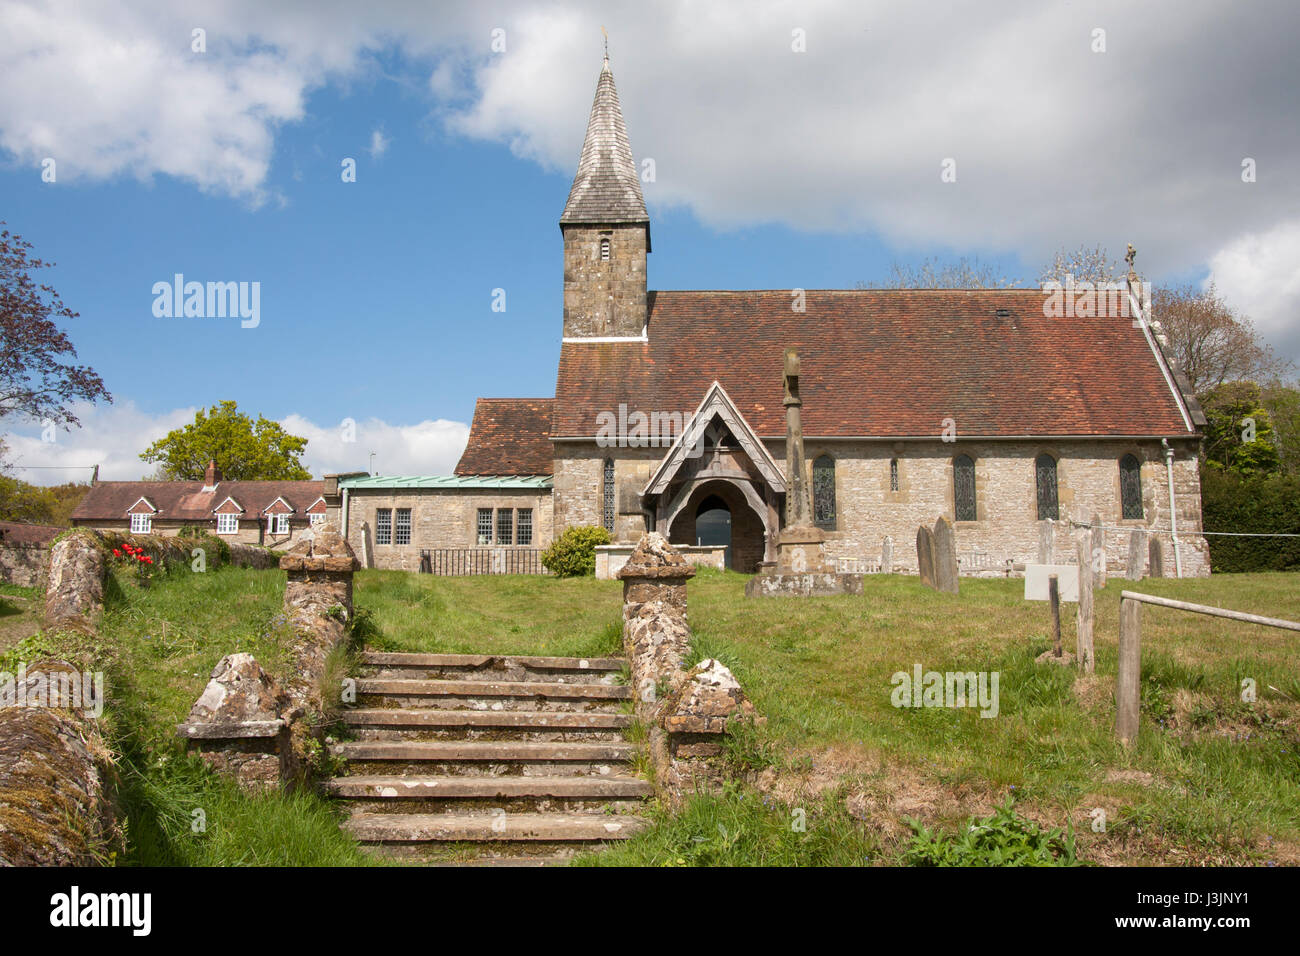 St Peters Church, Lynchmere nr Haslemere, Surrey Banque D'Images